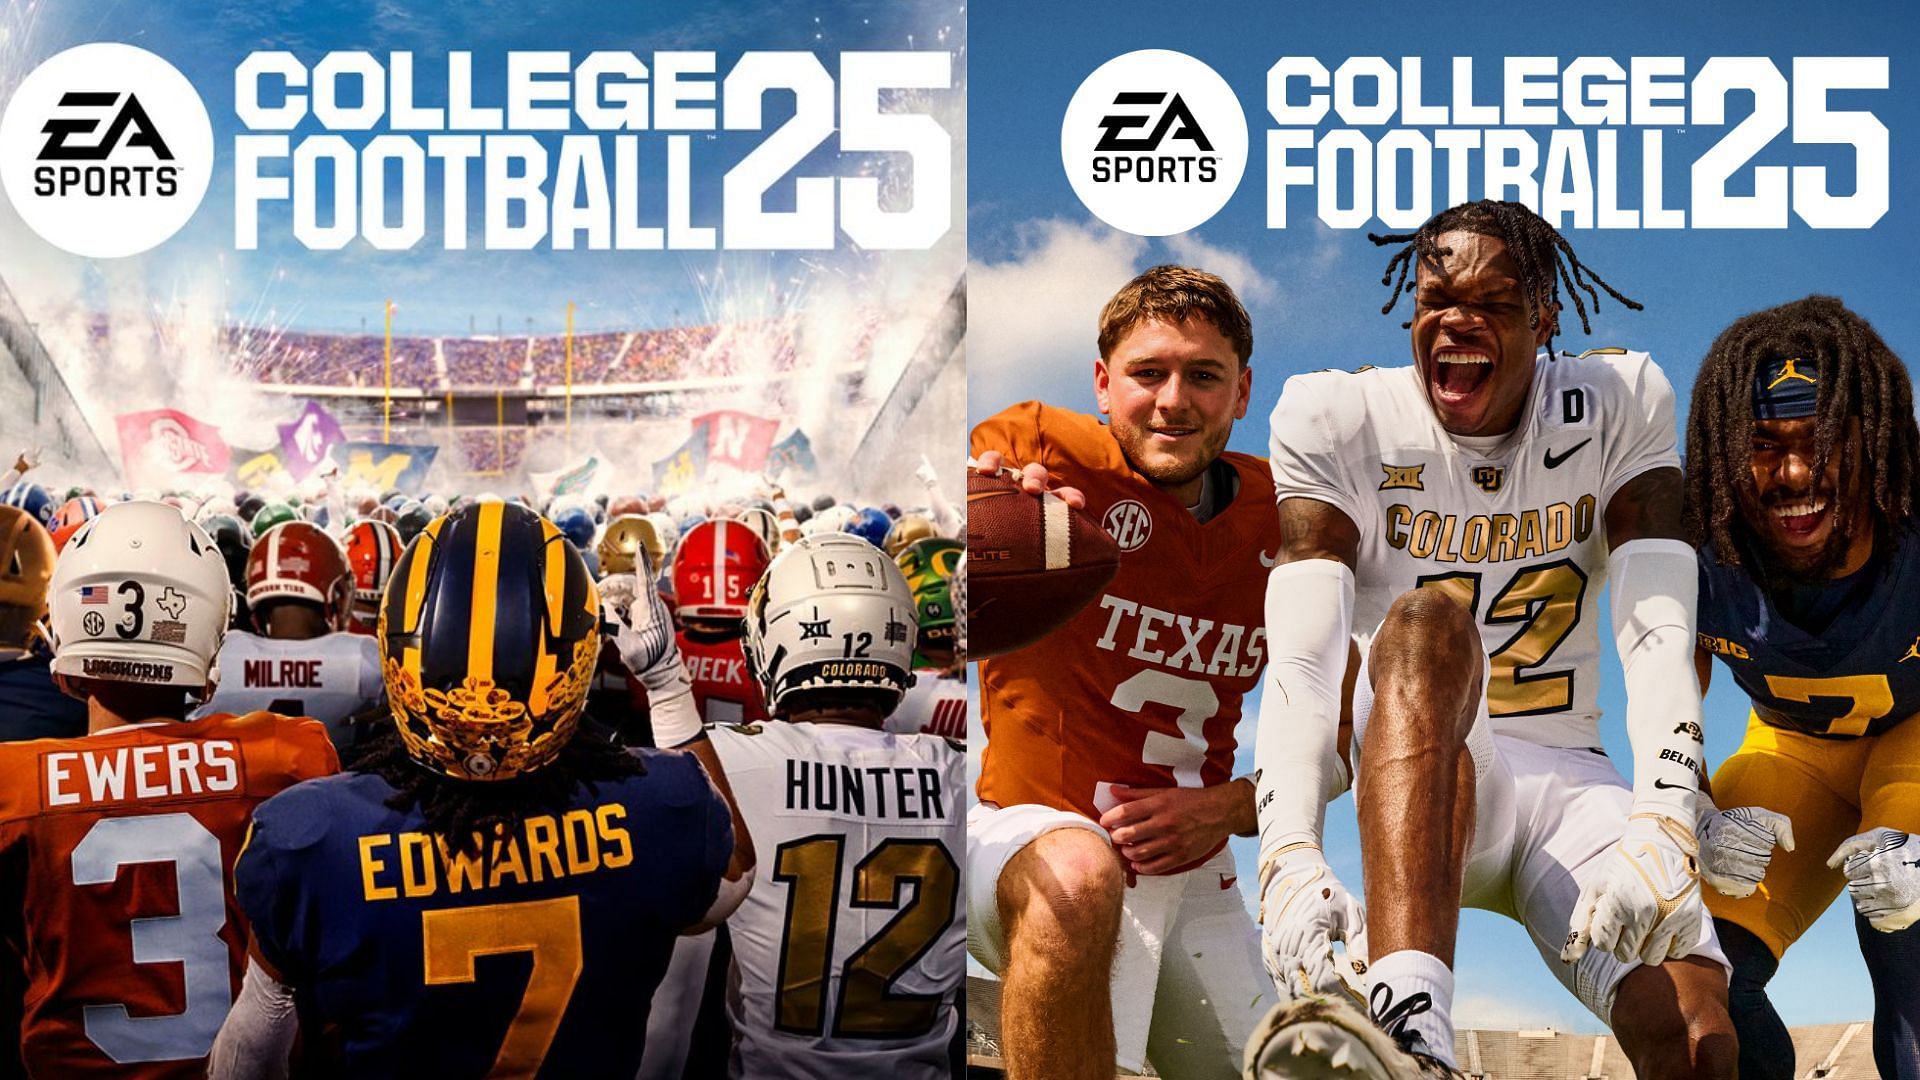 How to preorder College Football 25?